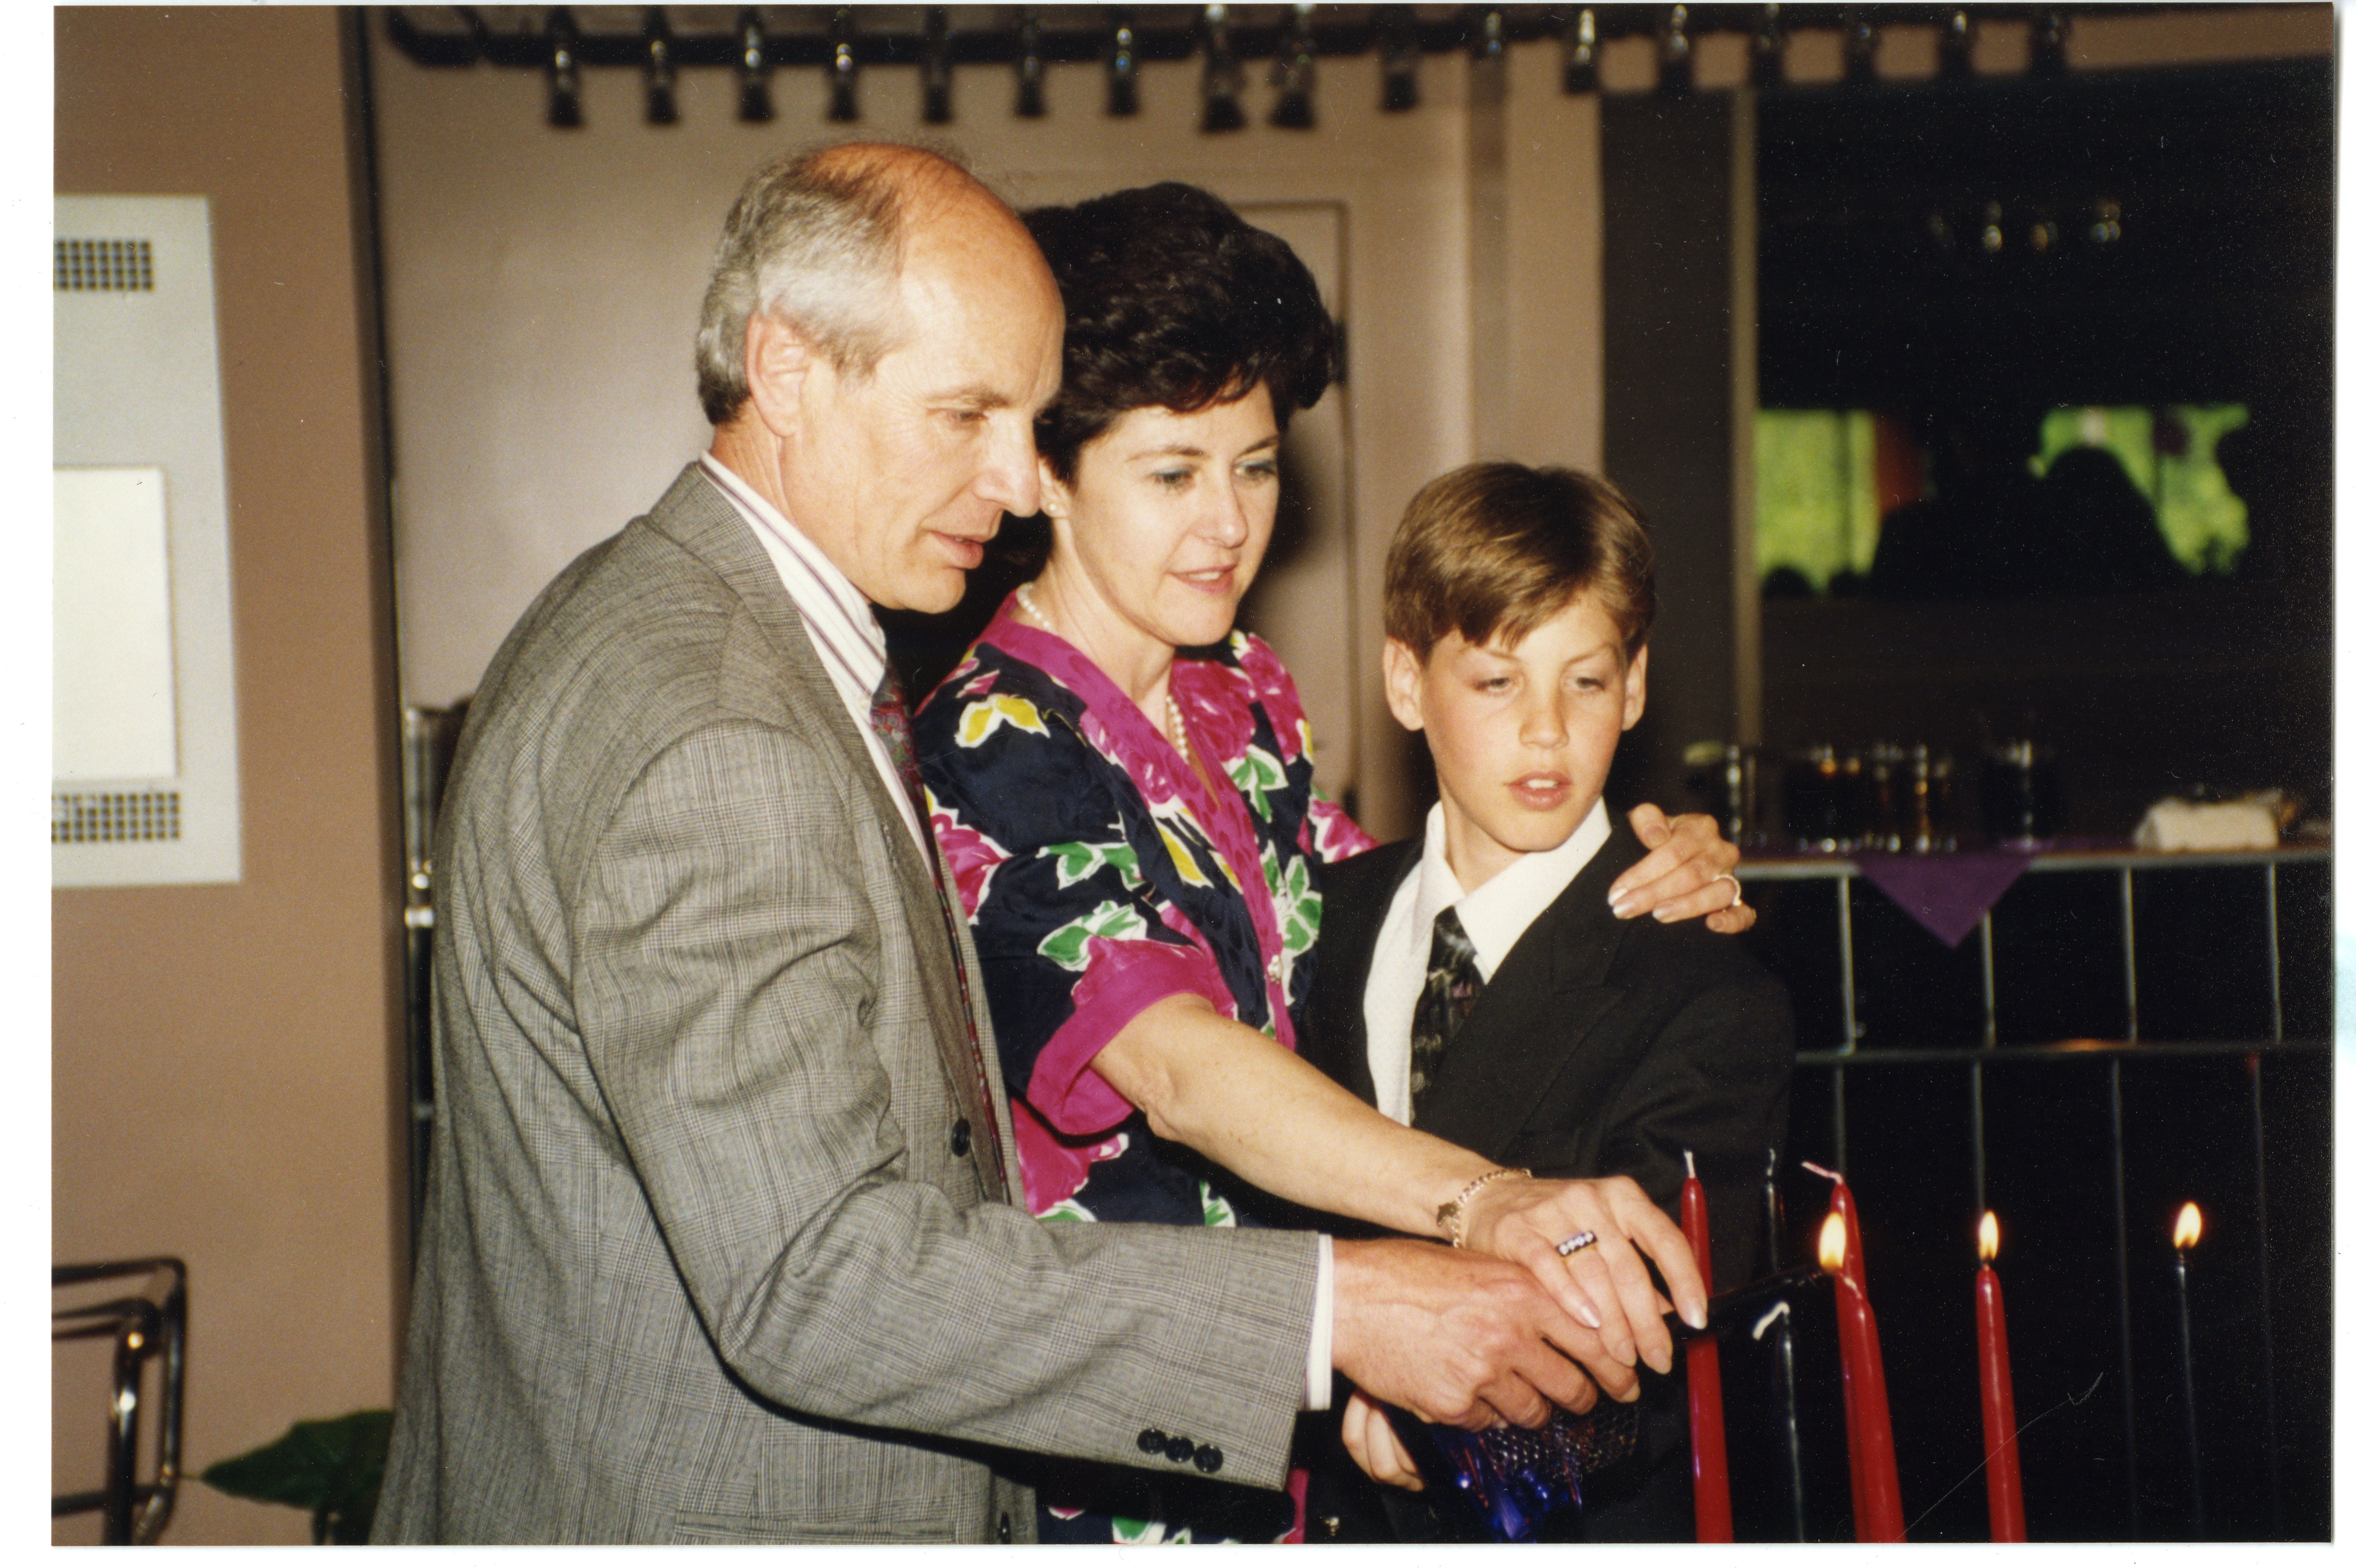 Candle lighting at Jeremy David Cohen’s Bar Mitzvah, 1992. Ontario Jewish Archives, accession 2015-3-8.